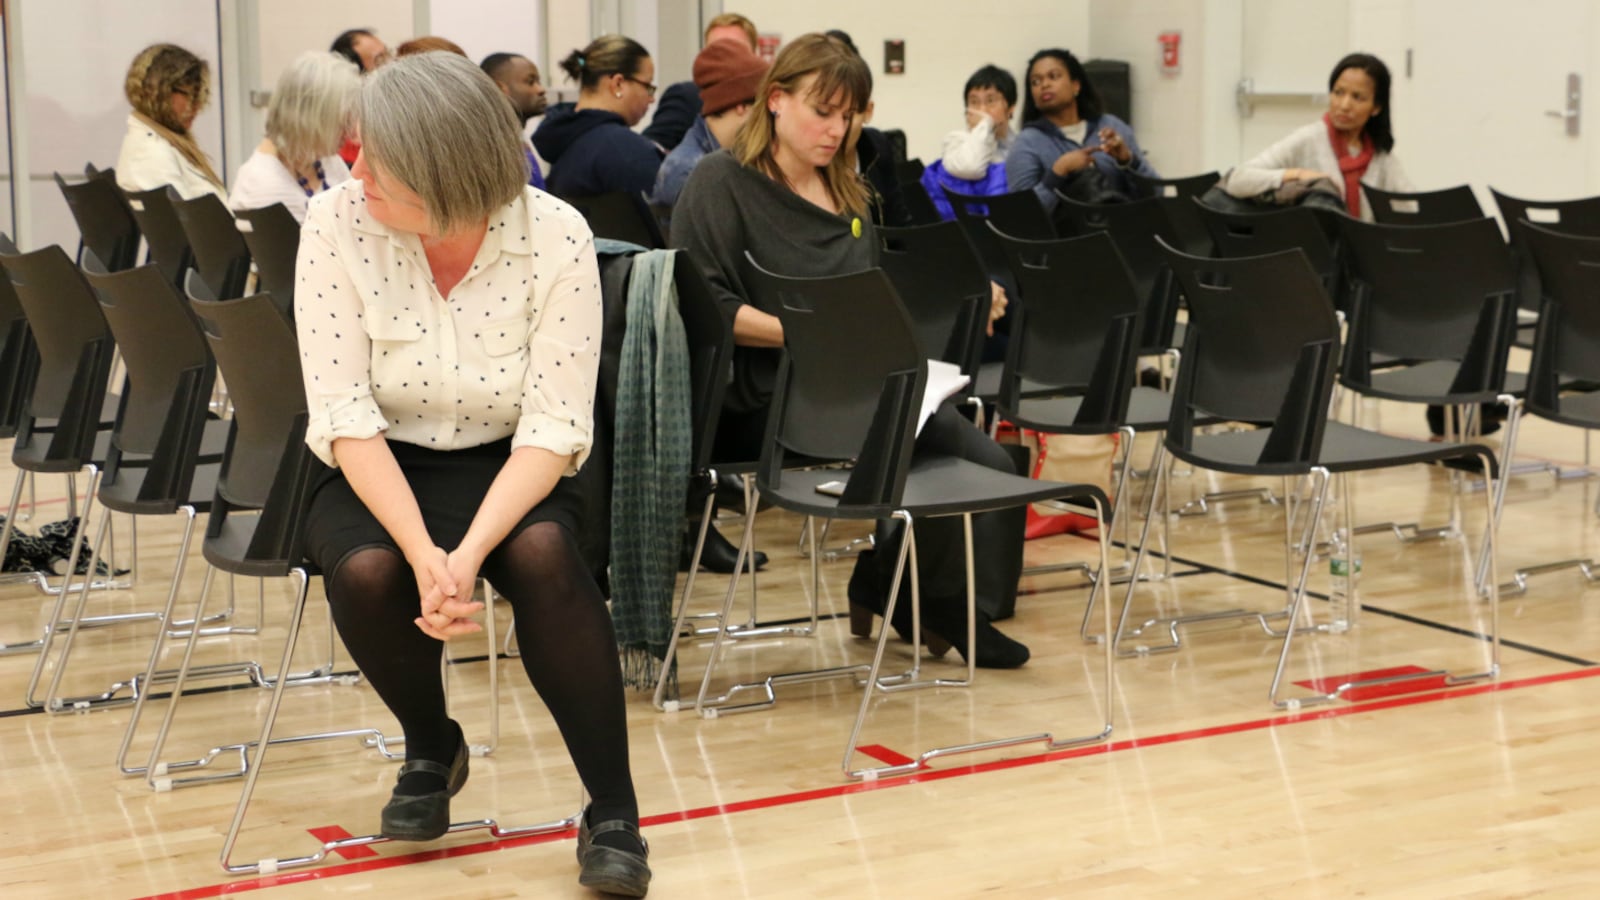 District 2 held a forum Monday about school segregation and the impact sorting students into different programs or schools based on their academic records.